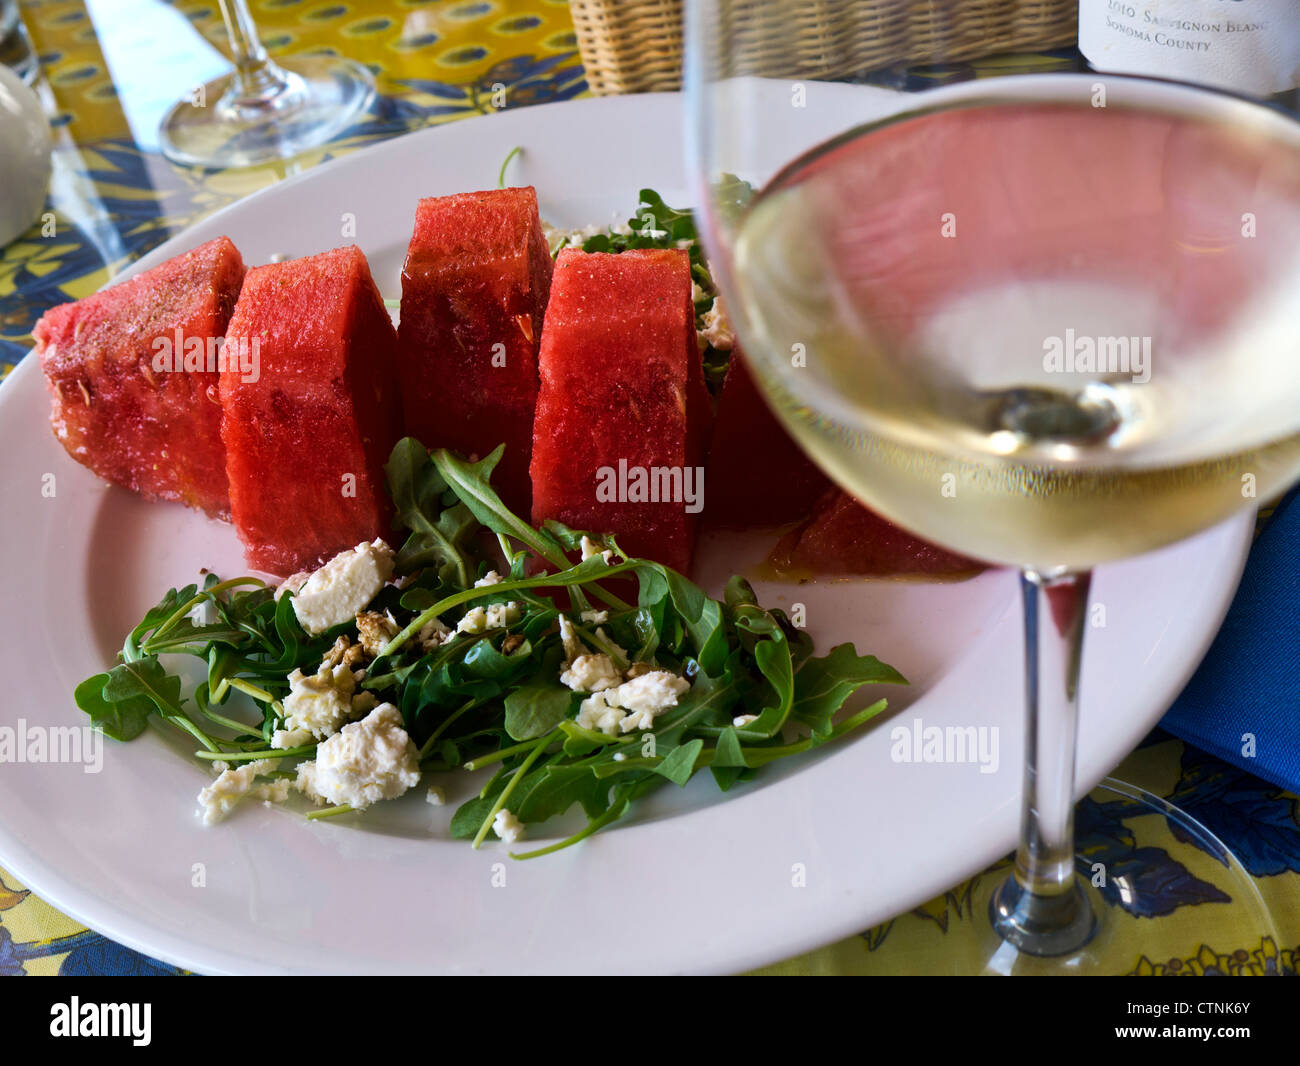 Watermelon and Roquefort salad with glass of Sauvignon Blanc wine Stock Photo